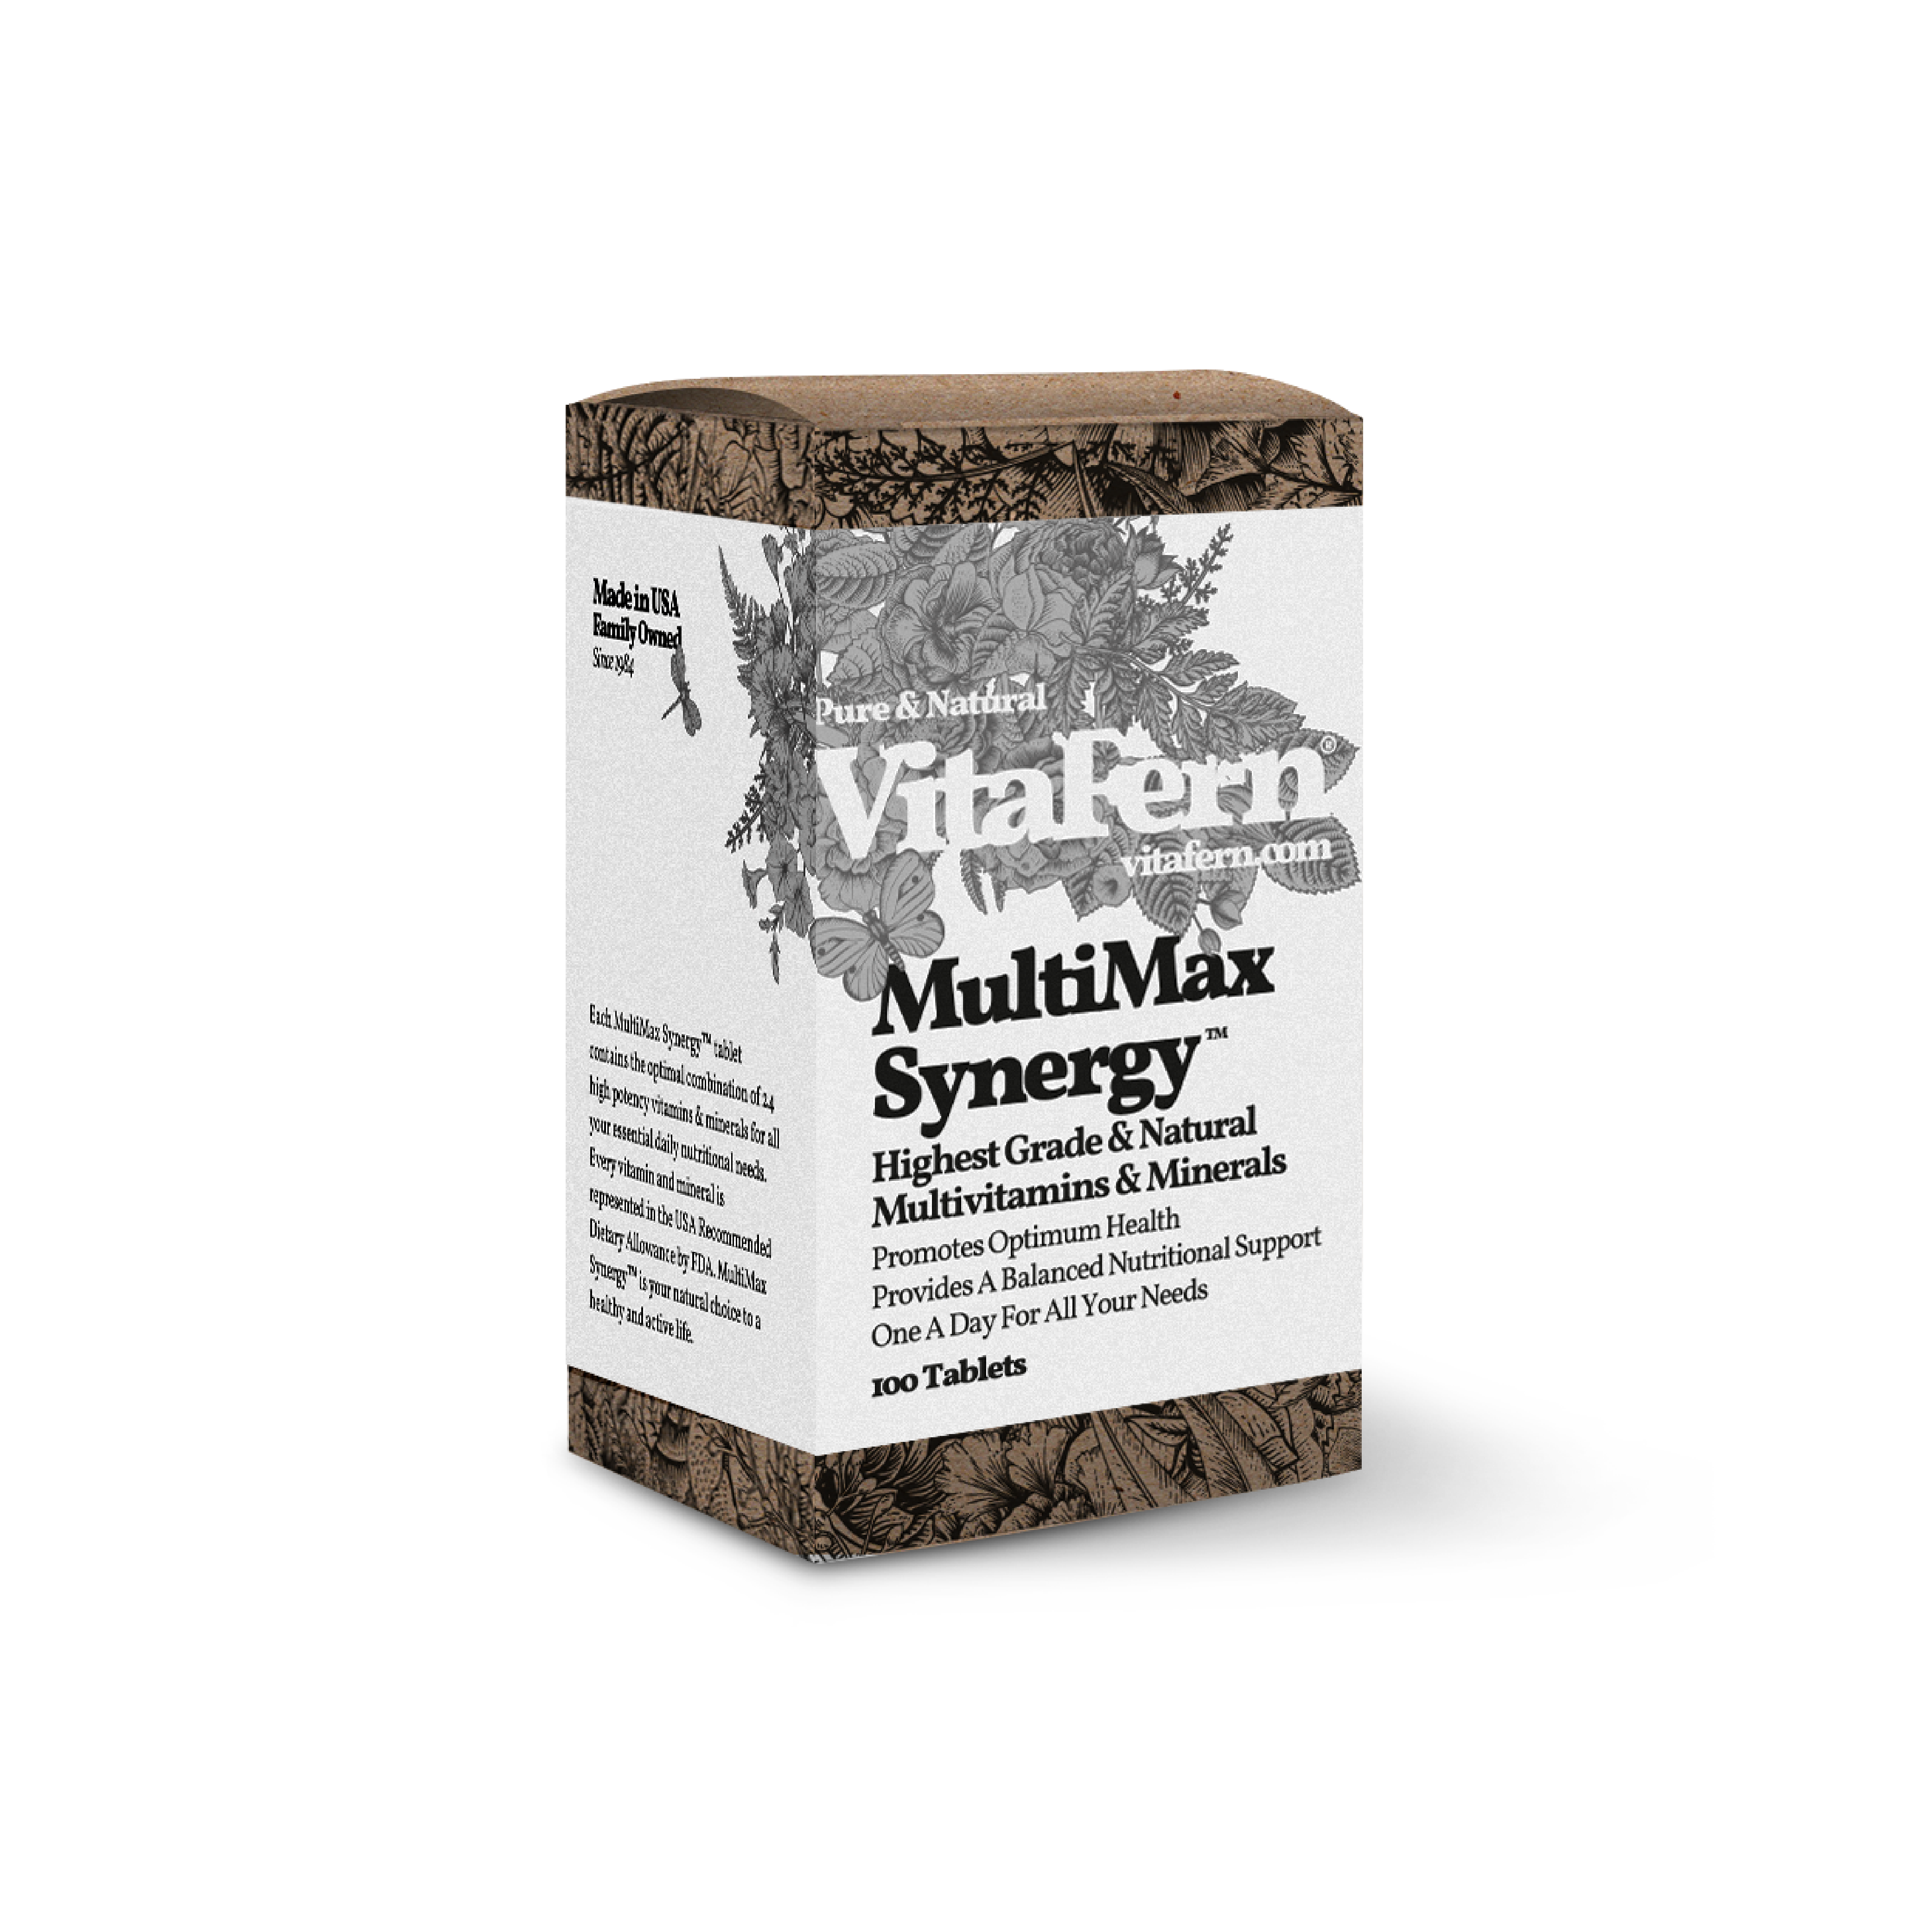 17037-vitafern-multimax-synergy-100s-new-38